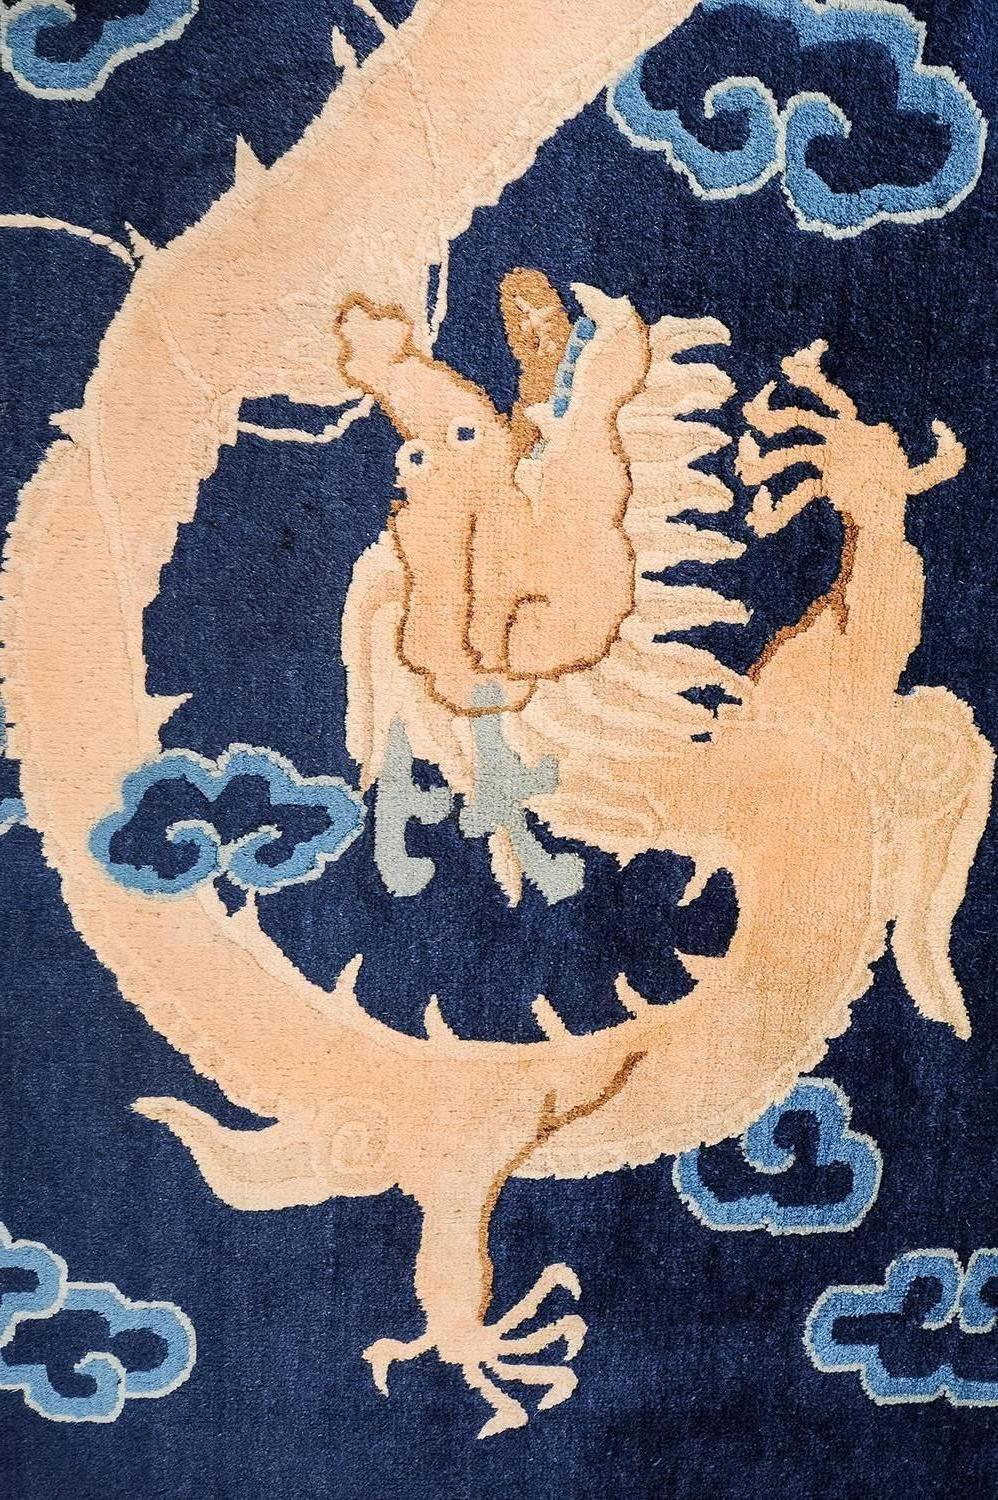 20th Century Magic Chinese Carpet with Dragon and Phoenix, from Private Collection